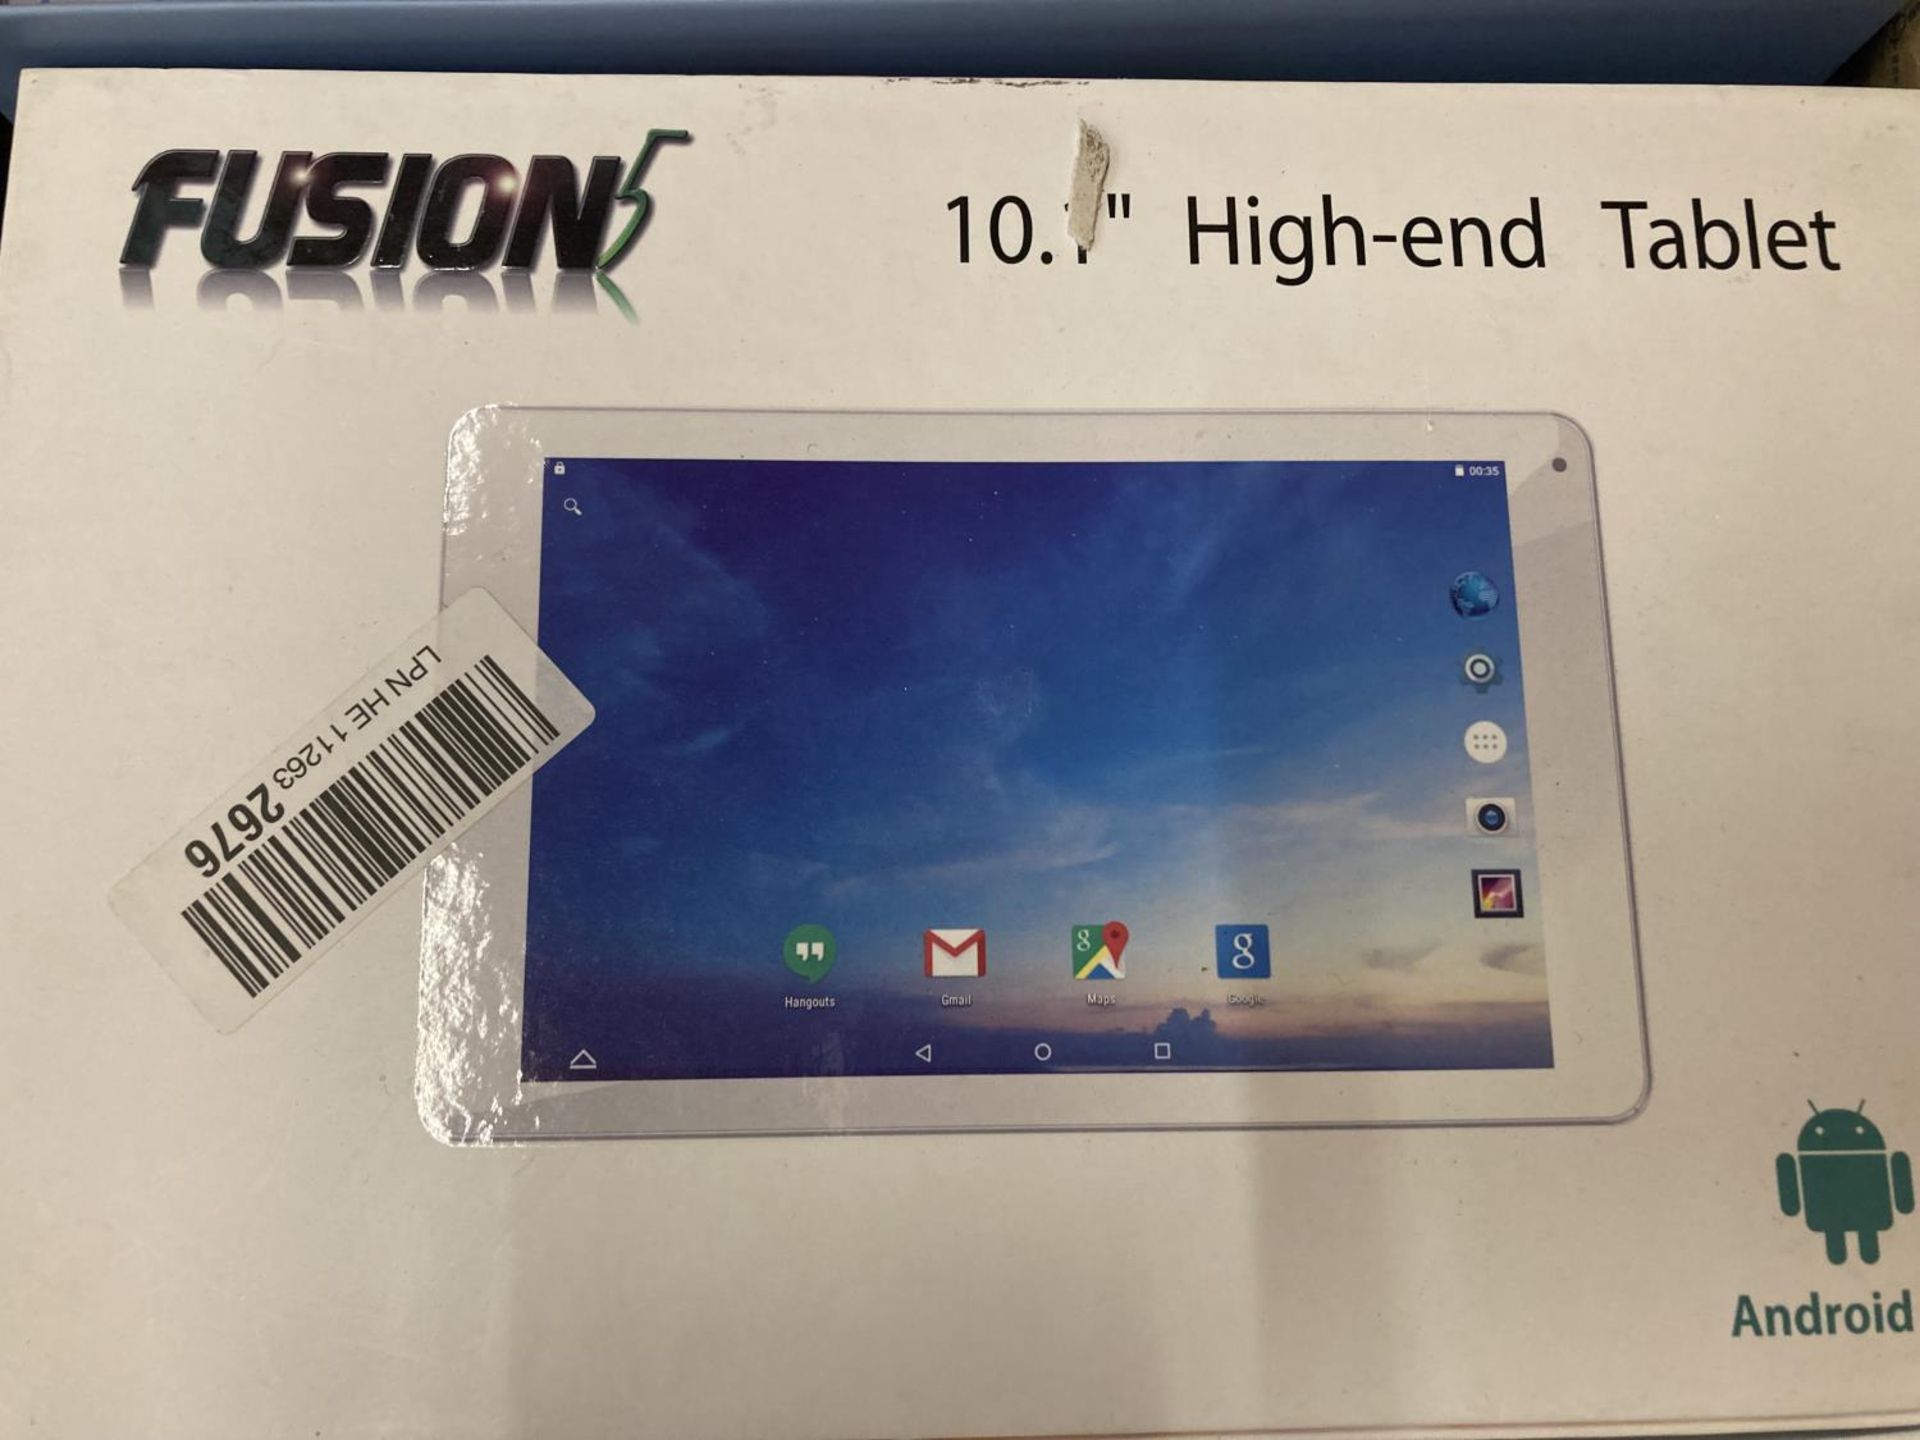 A FUSION 10.1 INCH ANDROID HIGH-END TABLET - BOXED - Image 2 of 2